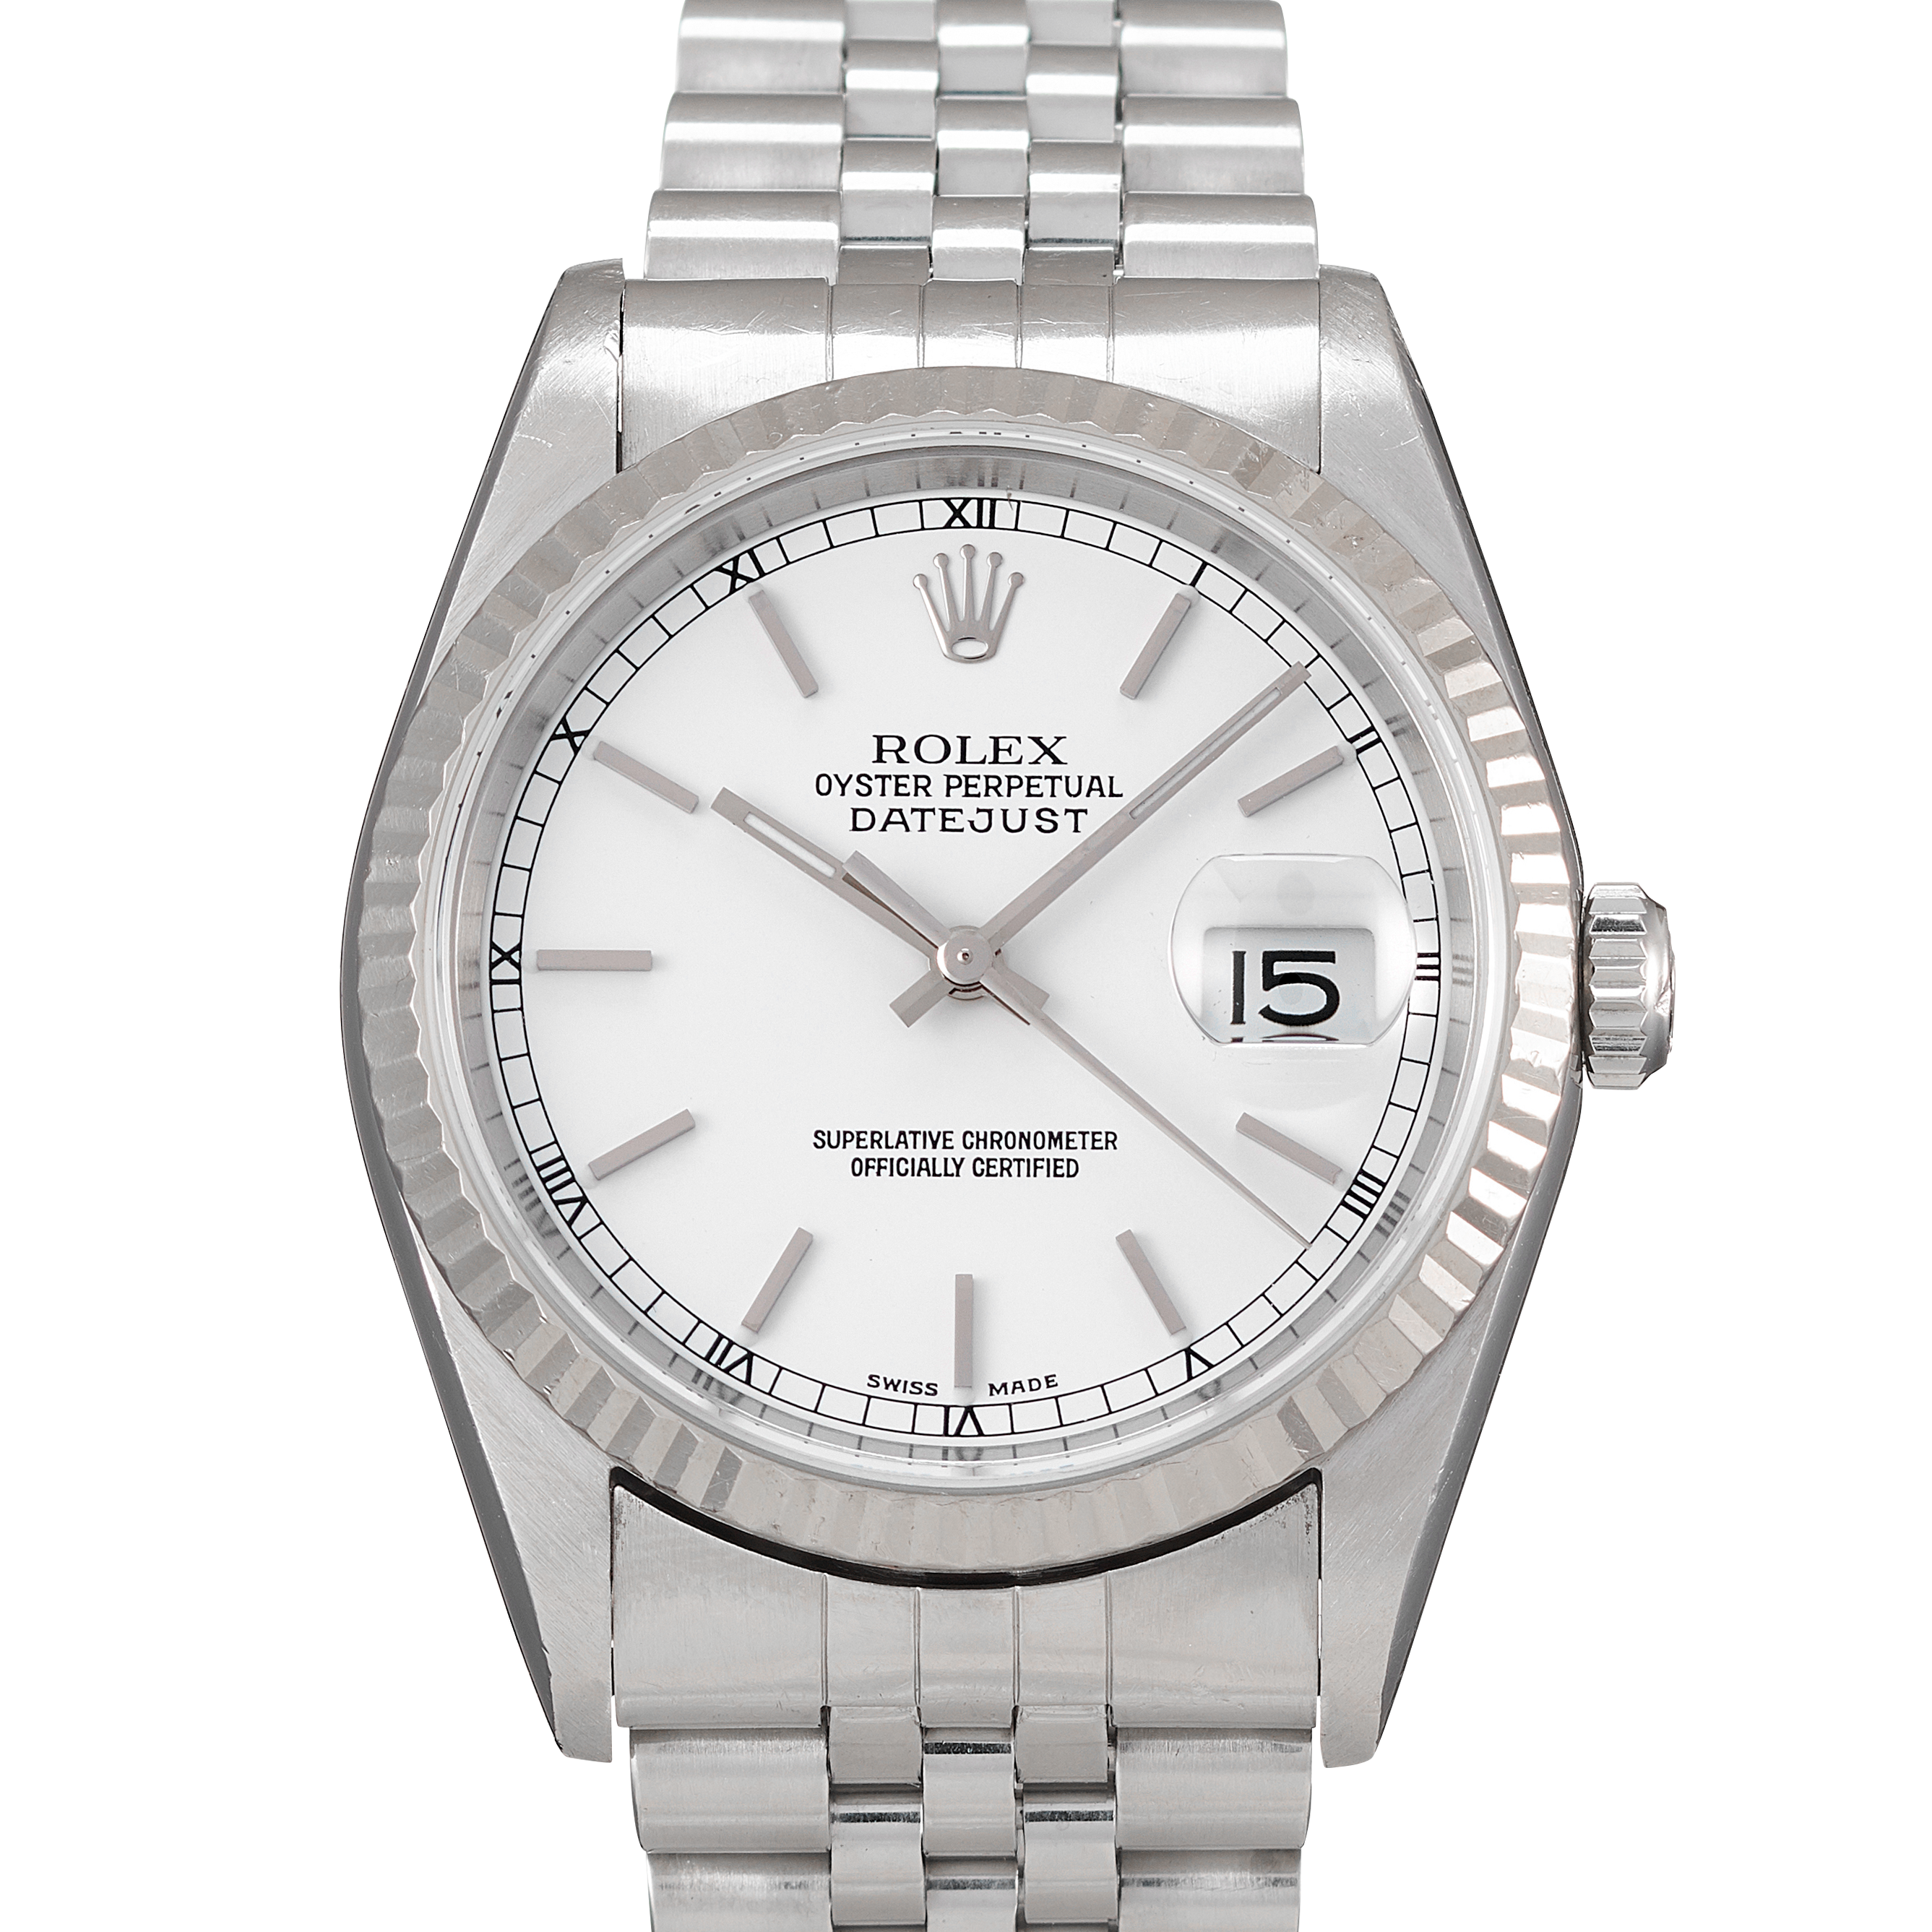 Rolex Datejust 16234 in Stainless Steel 